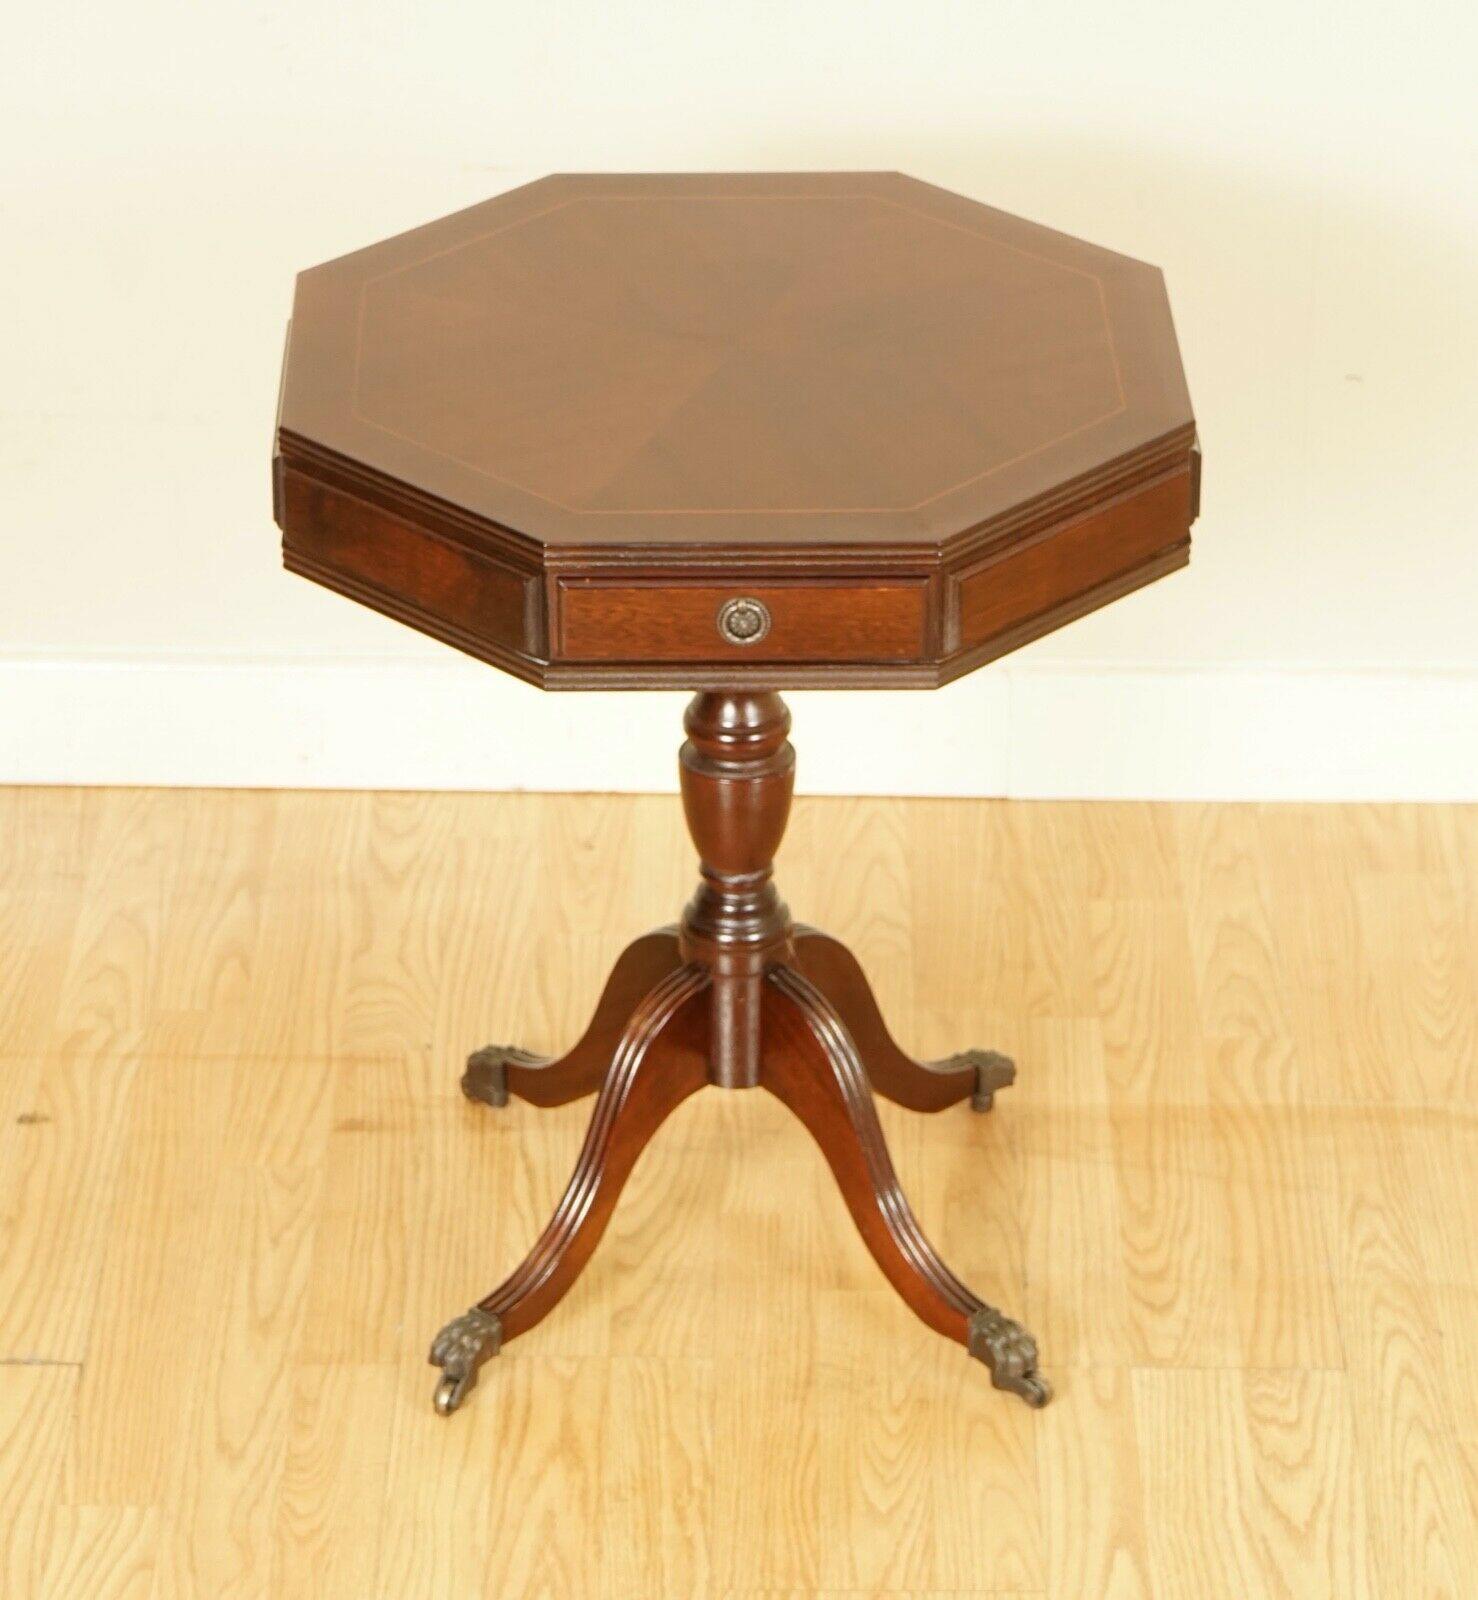 We are delighted to offer this beautiful hexagonal mahogany drum table.
We have lightly restored this by giving it a hand clean all over, hand waxed and hand polish. 
Please view our pictures as they form part of the description. 

Dimensions